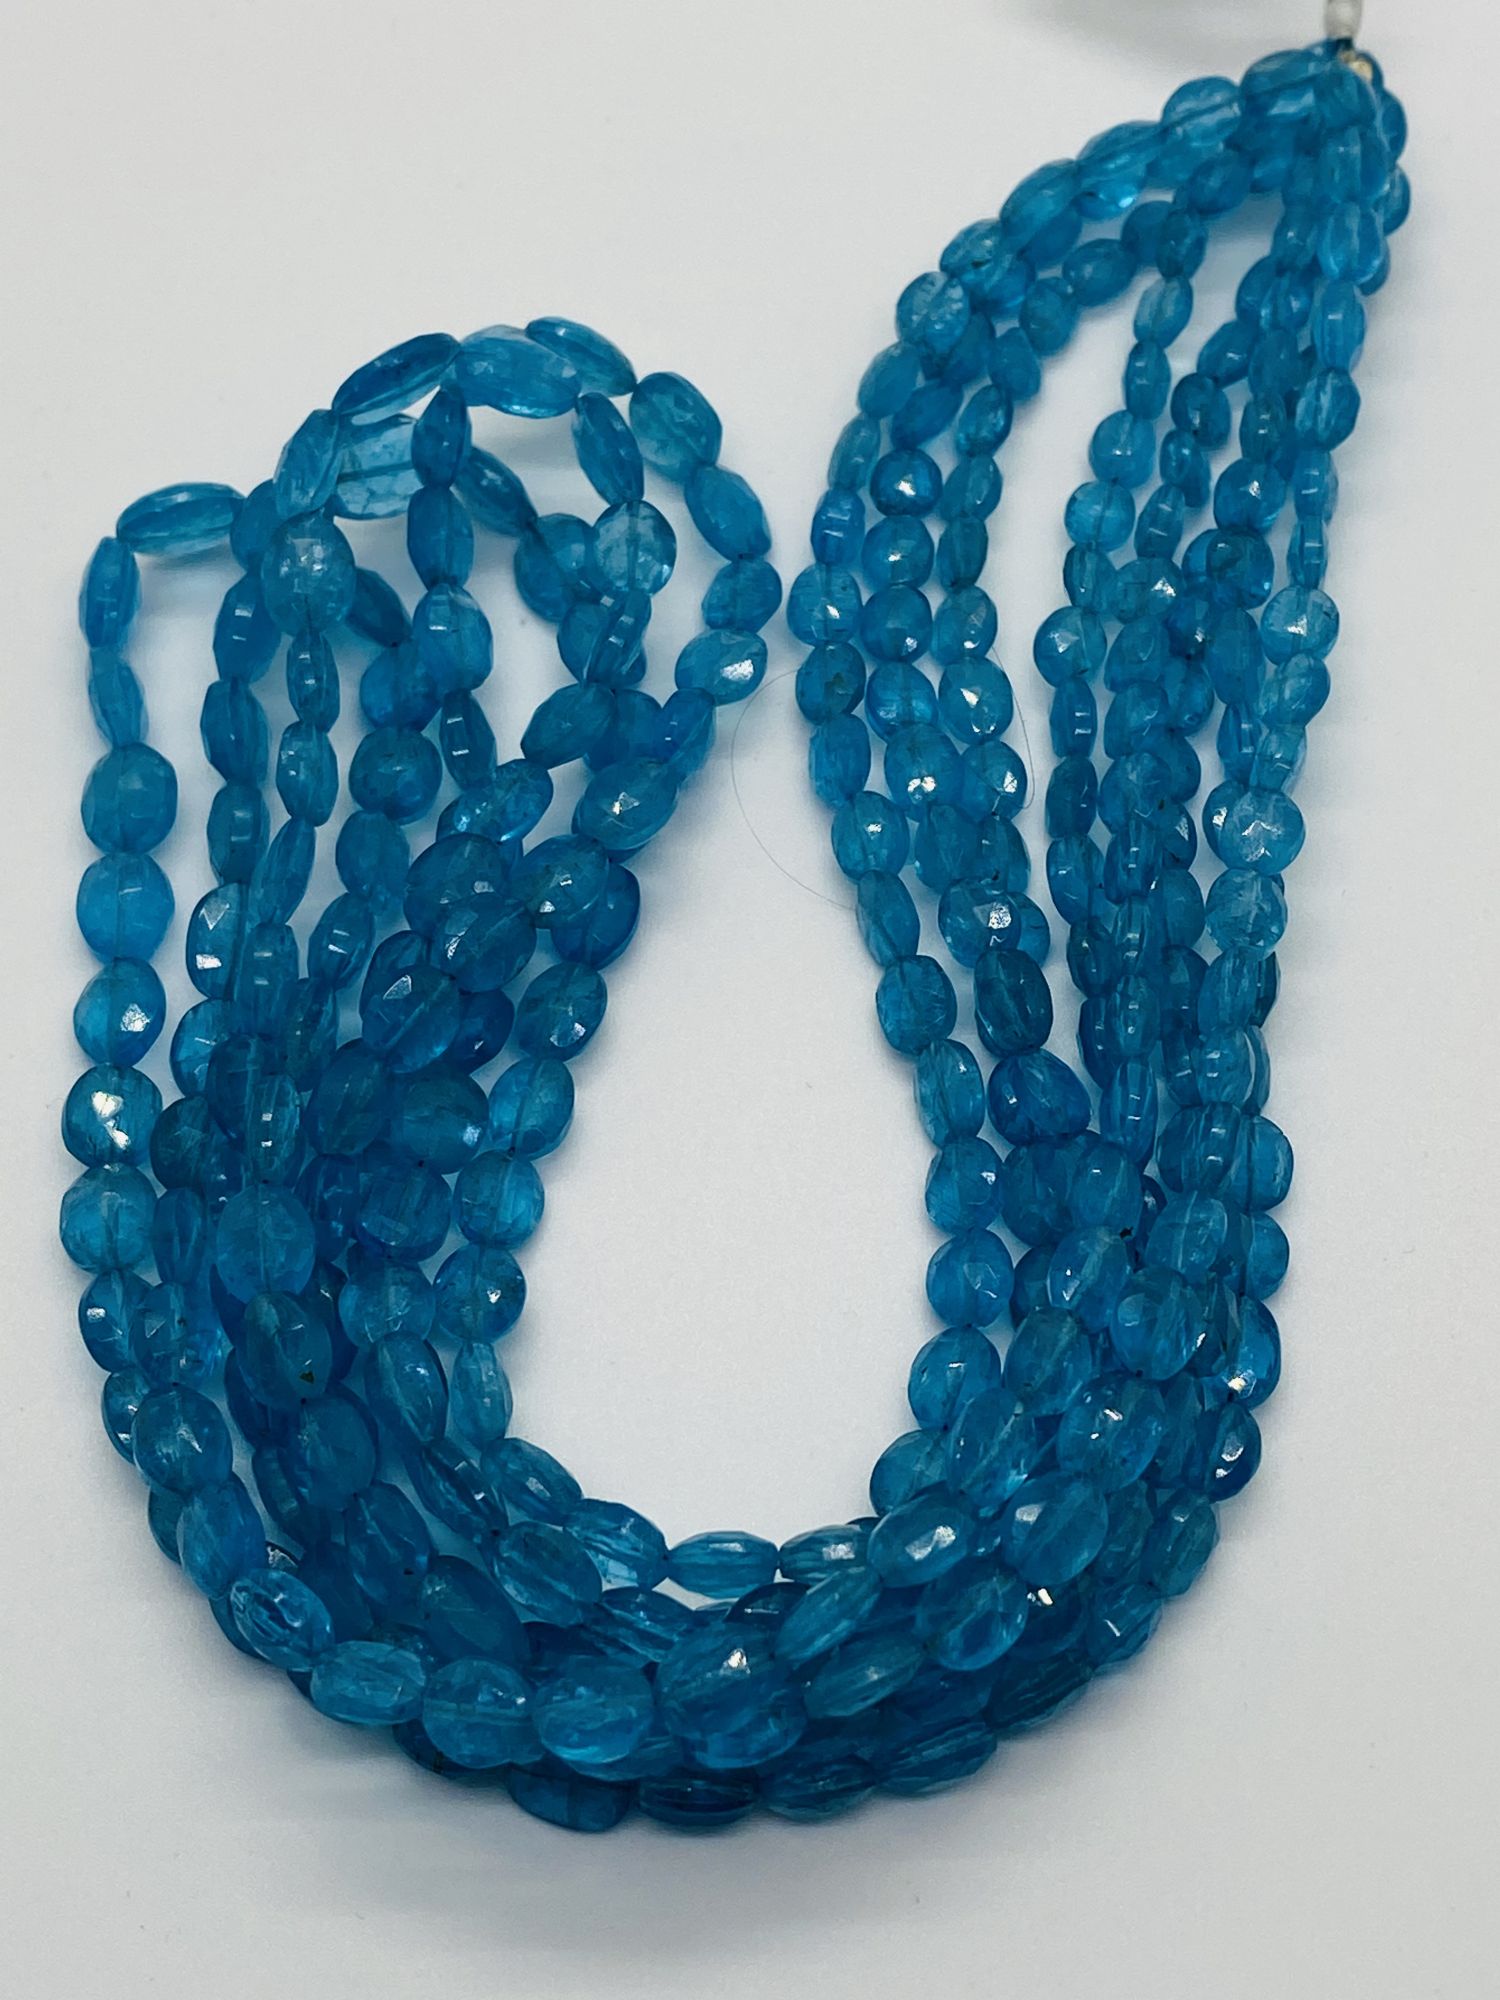 Peacock Apatite Ovals Faceted